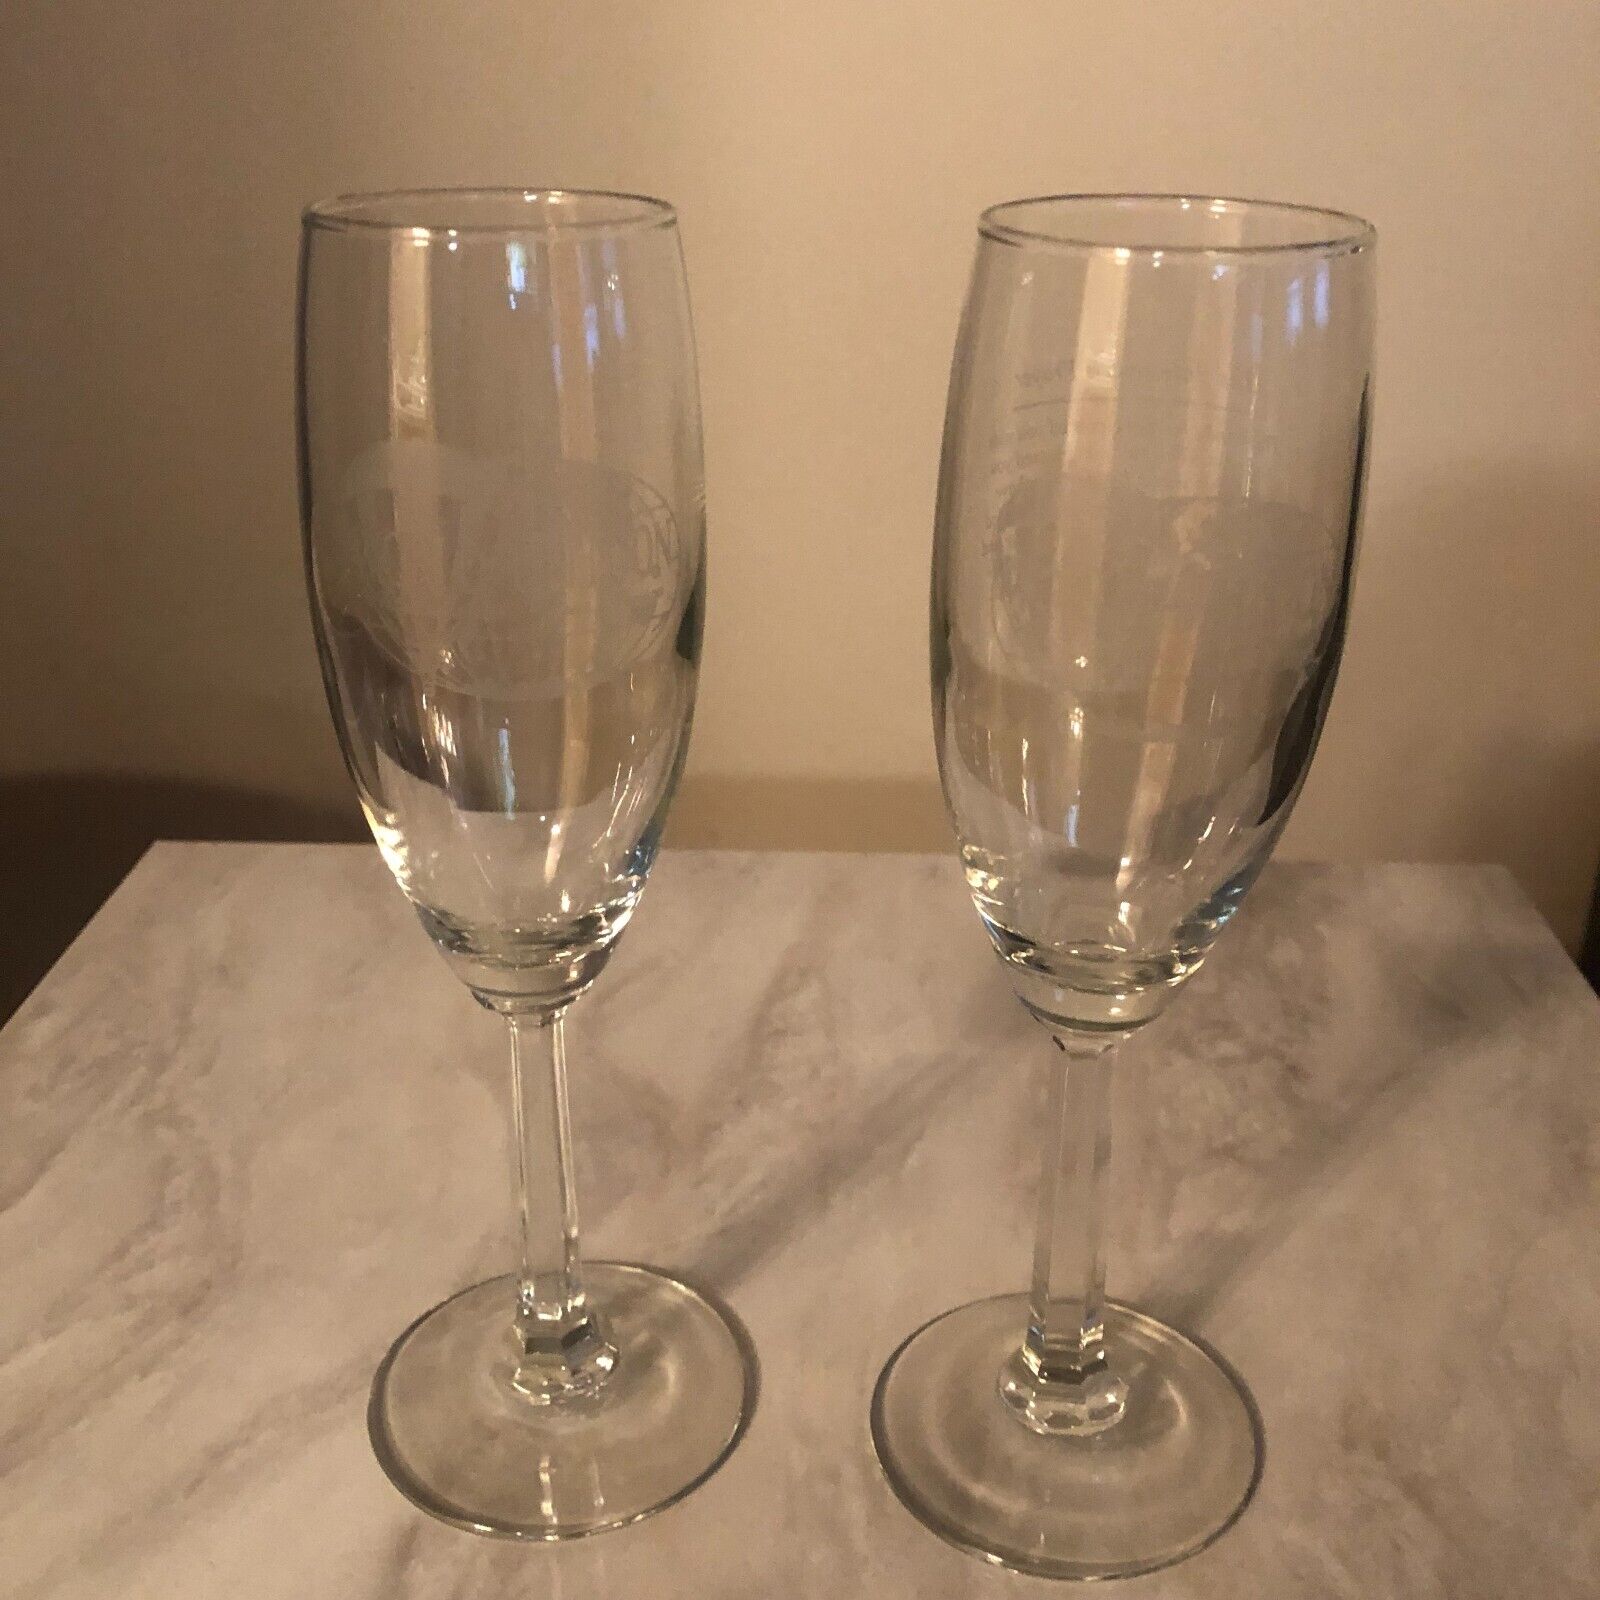 World Balloon Albuquerque New Mexico Etched Champagne Flute Glass SET OF 2